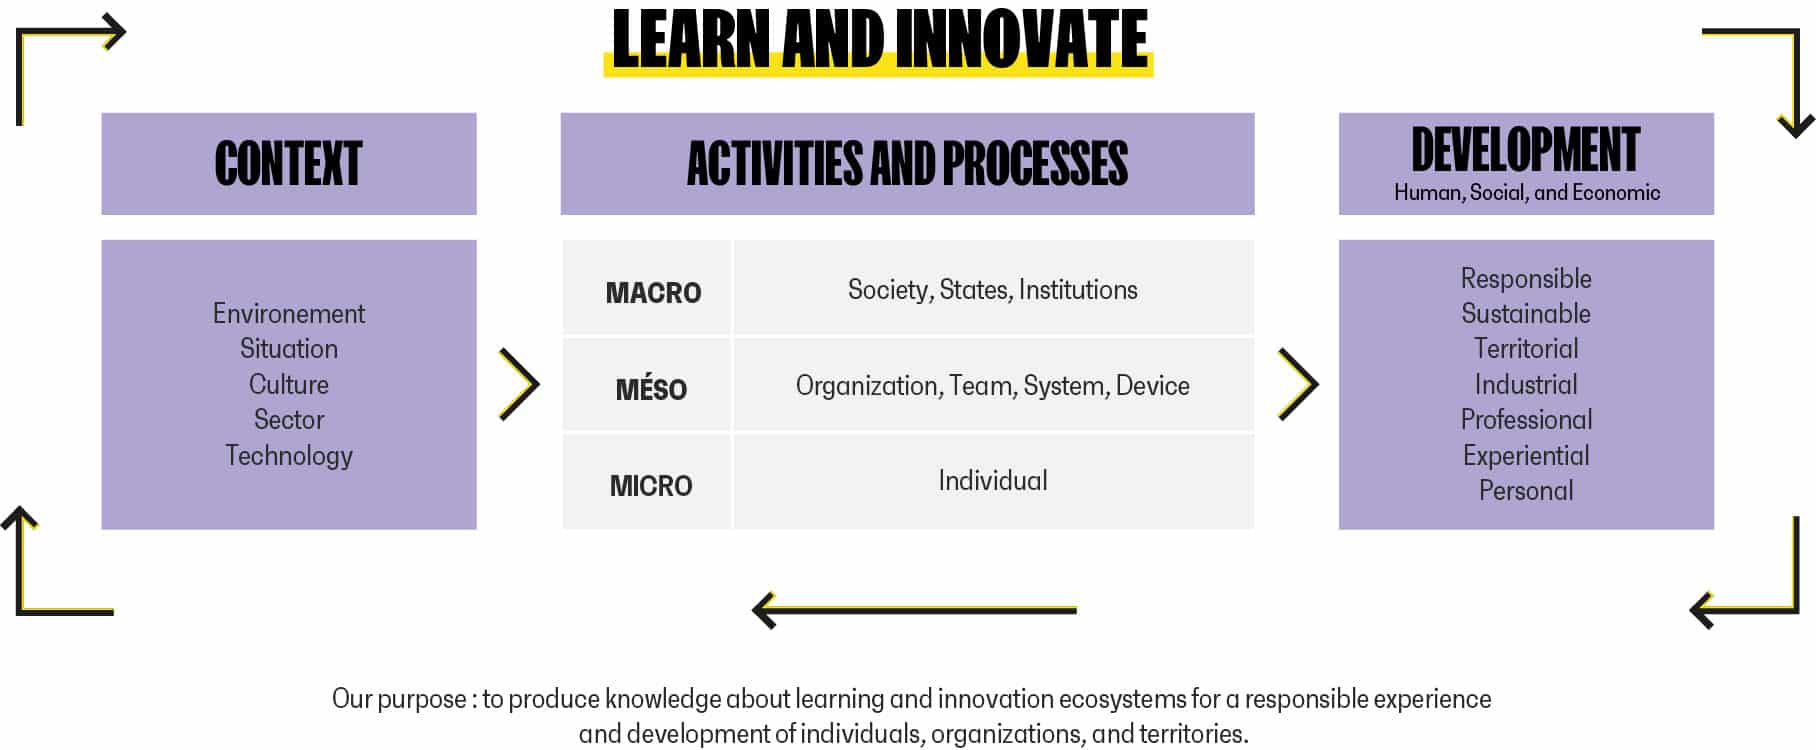 LEARN AND INNOVATE

Context :
- Environment
- Situation
- Culture
- Sector
- Technology

Activities and processes :

MACRO :
- Society, States, Institutions

MÉSO :
- Organization, Team, System, Device

MICRO :
- Individual

Development: Human, social and economic :
- Responsible
- Sustainable
- Territorial
- Industrial
- Professional
- Experiential
- Personal

Our purpose: to produce knowledge on learning and innovation ecosystems for responsible experience and development of individuals, organizations and territories.